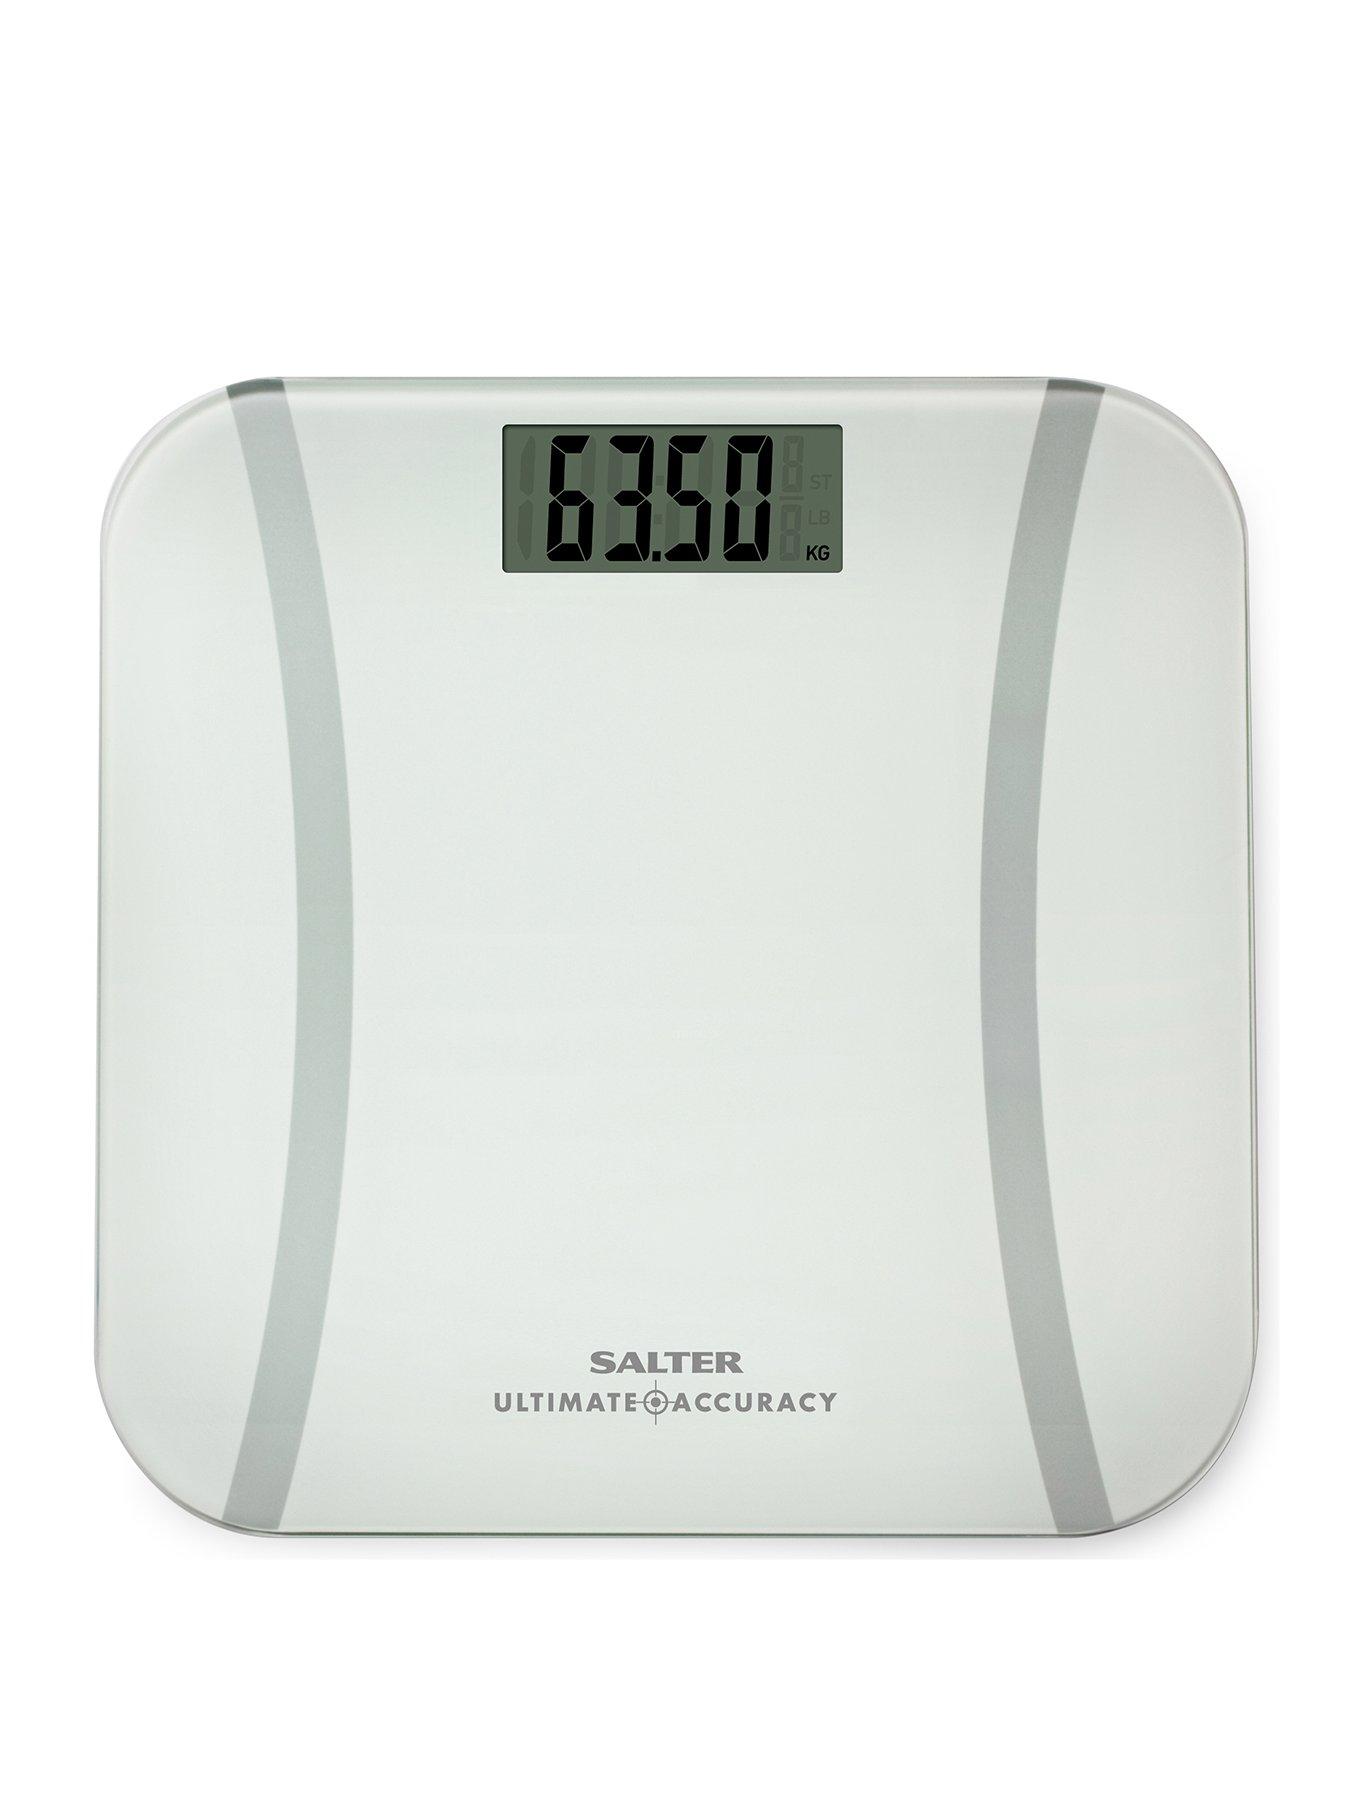 Digital Scale Weight Watchers Bathroom Salter Up To 40 Stone Large Display Diet 